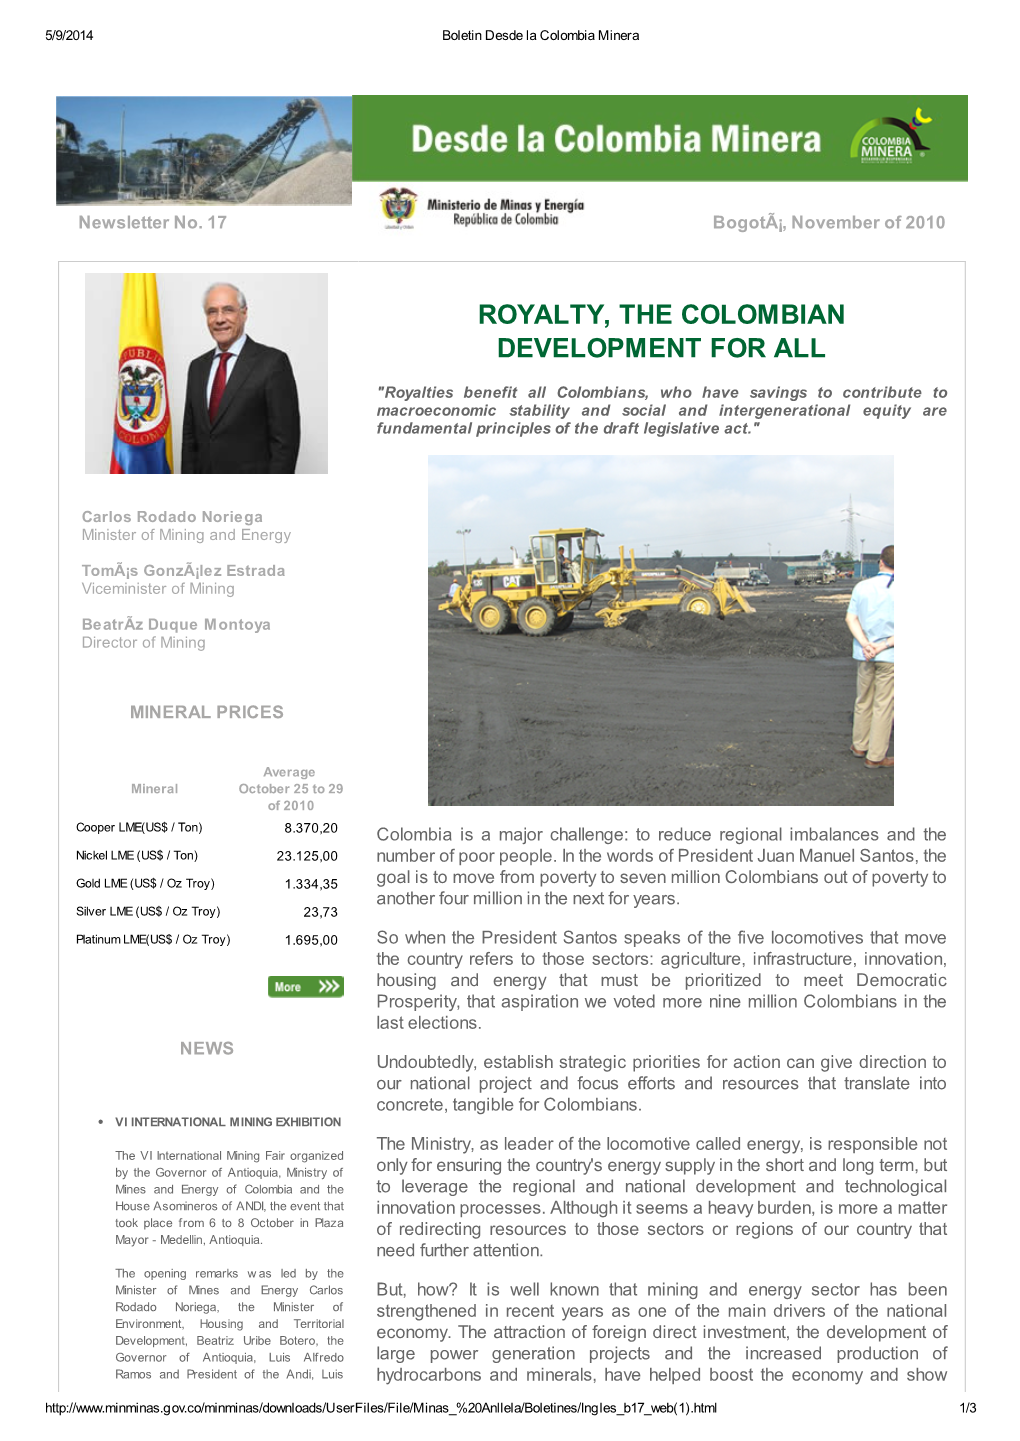 Royalty, the Colombian Development for All